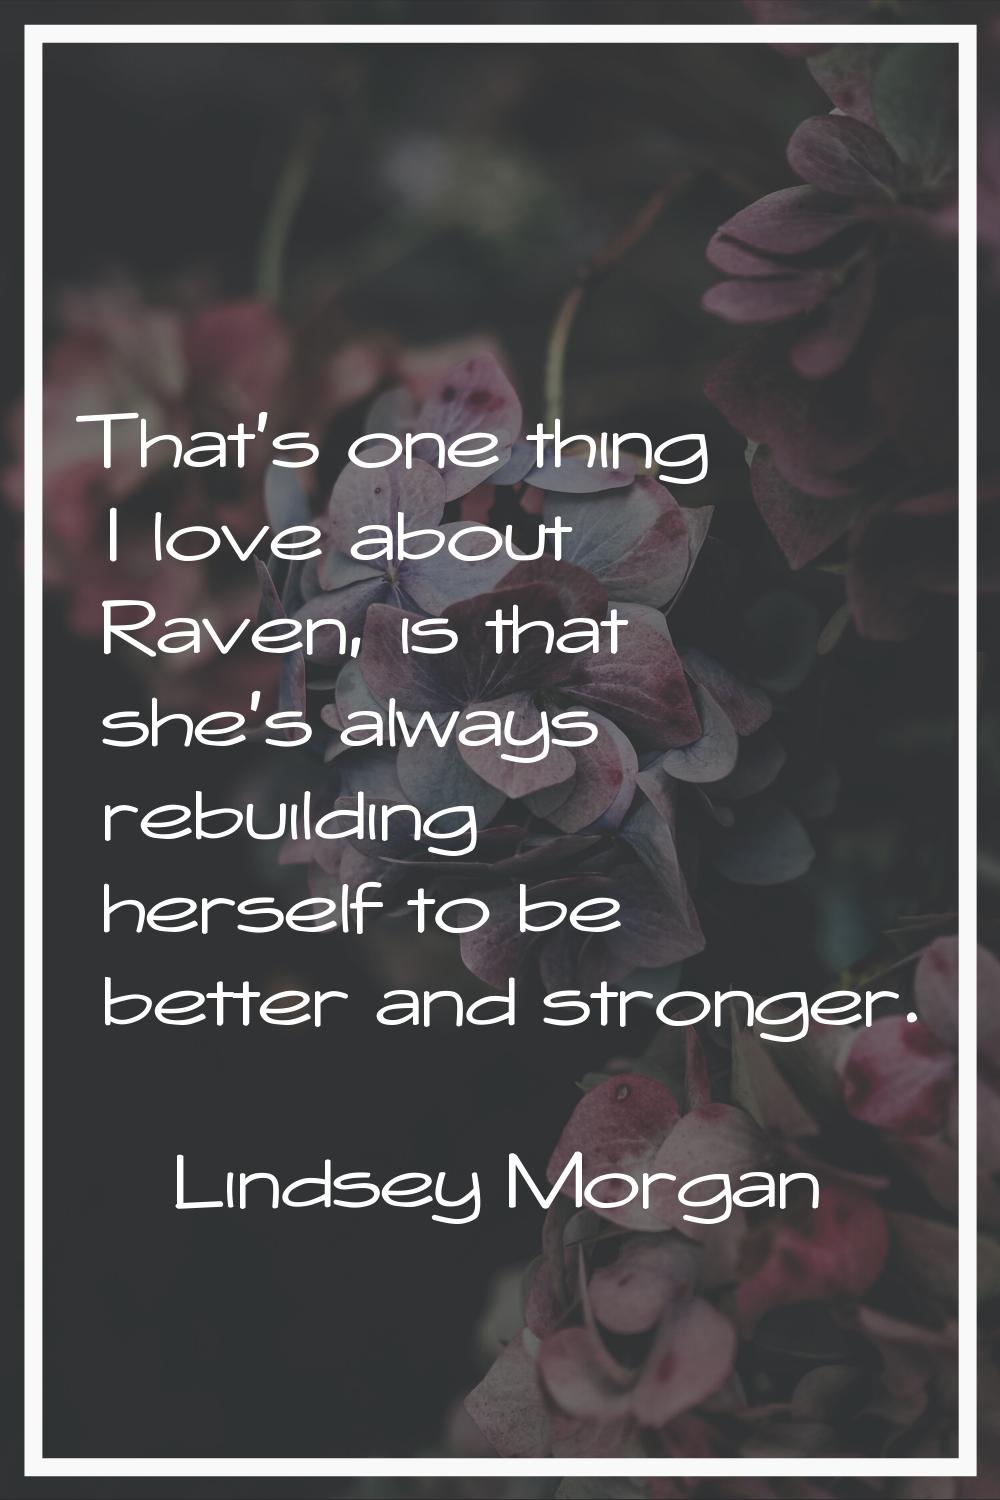 That's one thing I love about Raven, is that she's always rebuilding herself to be better and stron